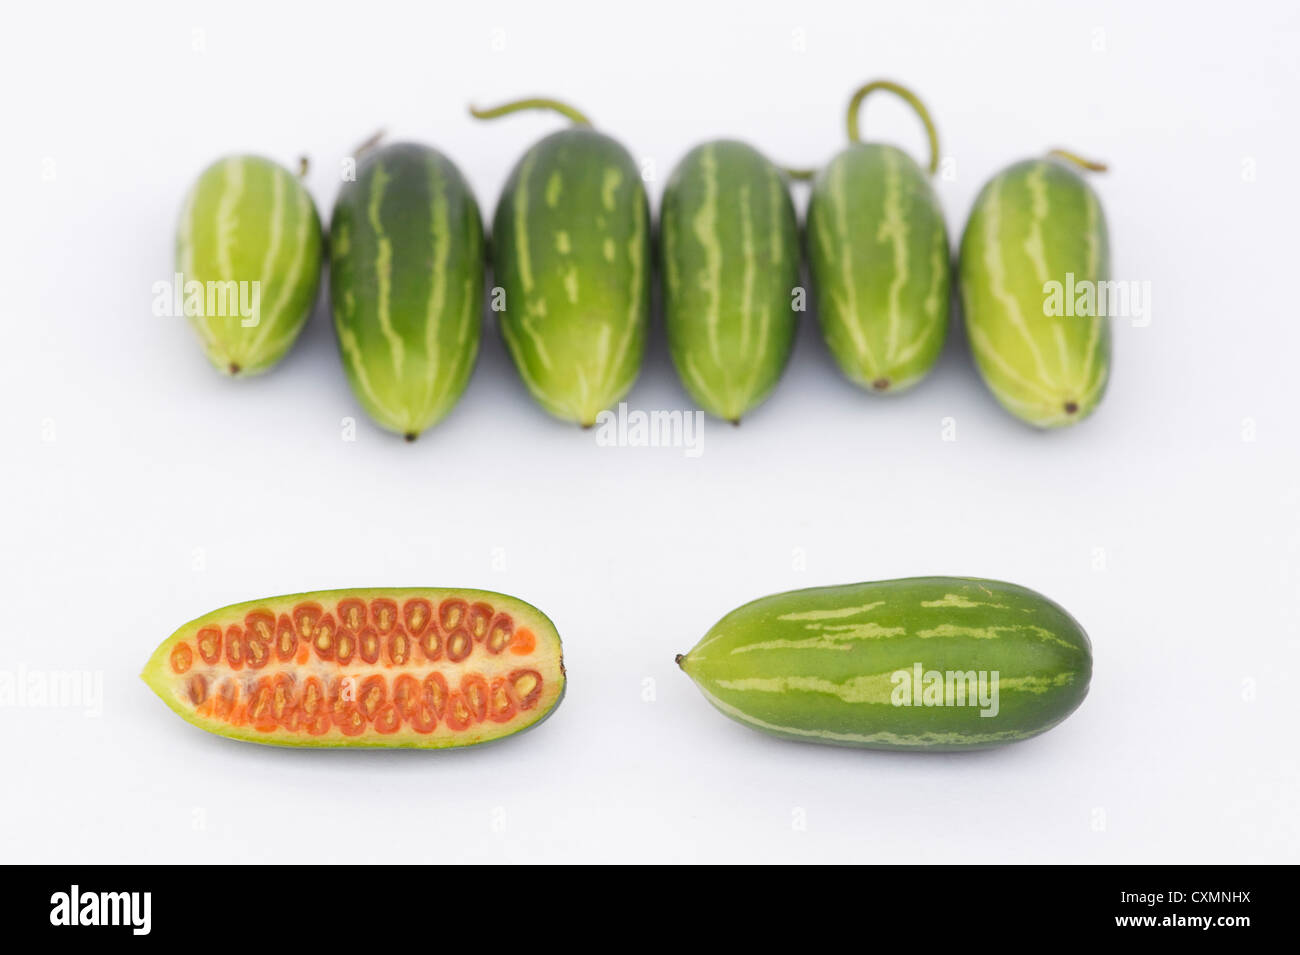 Coccinia grandis. Ivy Gourds on white background Stock Photo